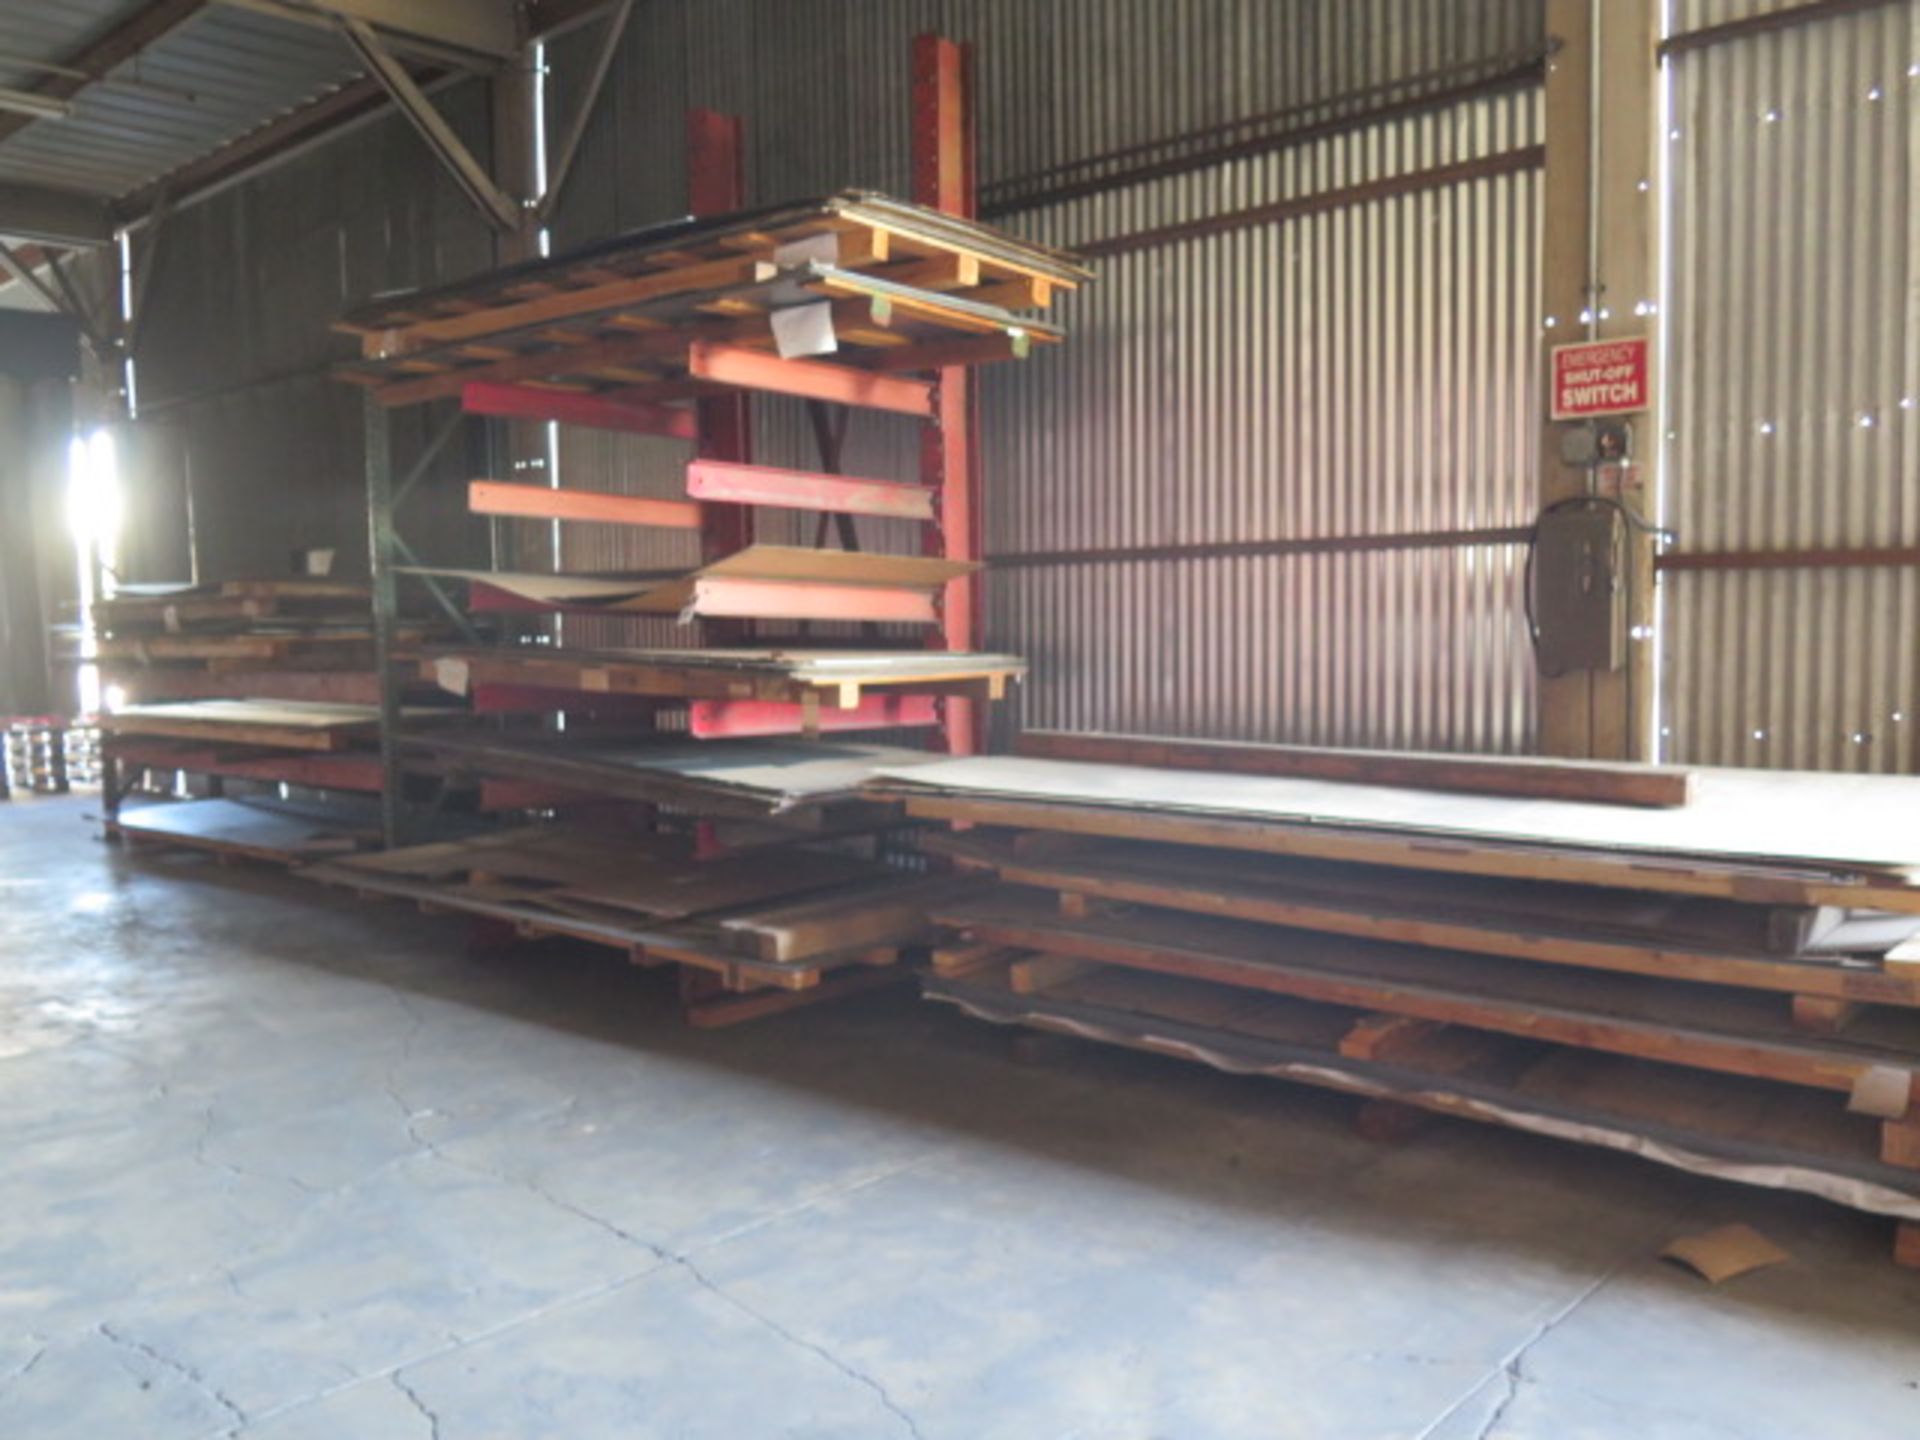 Raw Materials Aluminum, Stainless and Steel Sheet Stock w/ Cantilever Rack and Pallet Rack (SOLD AS